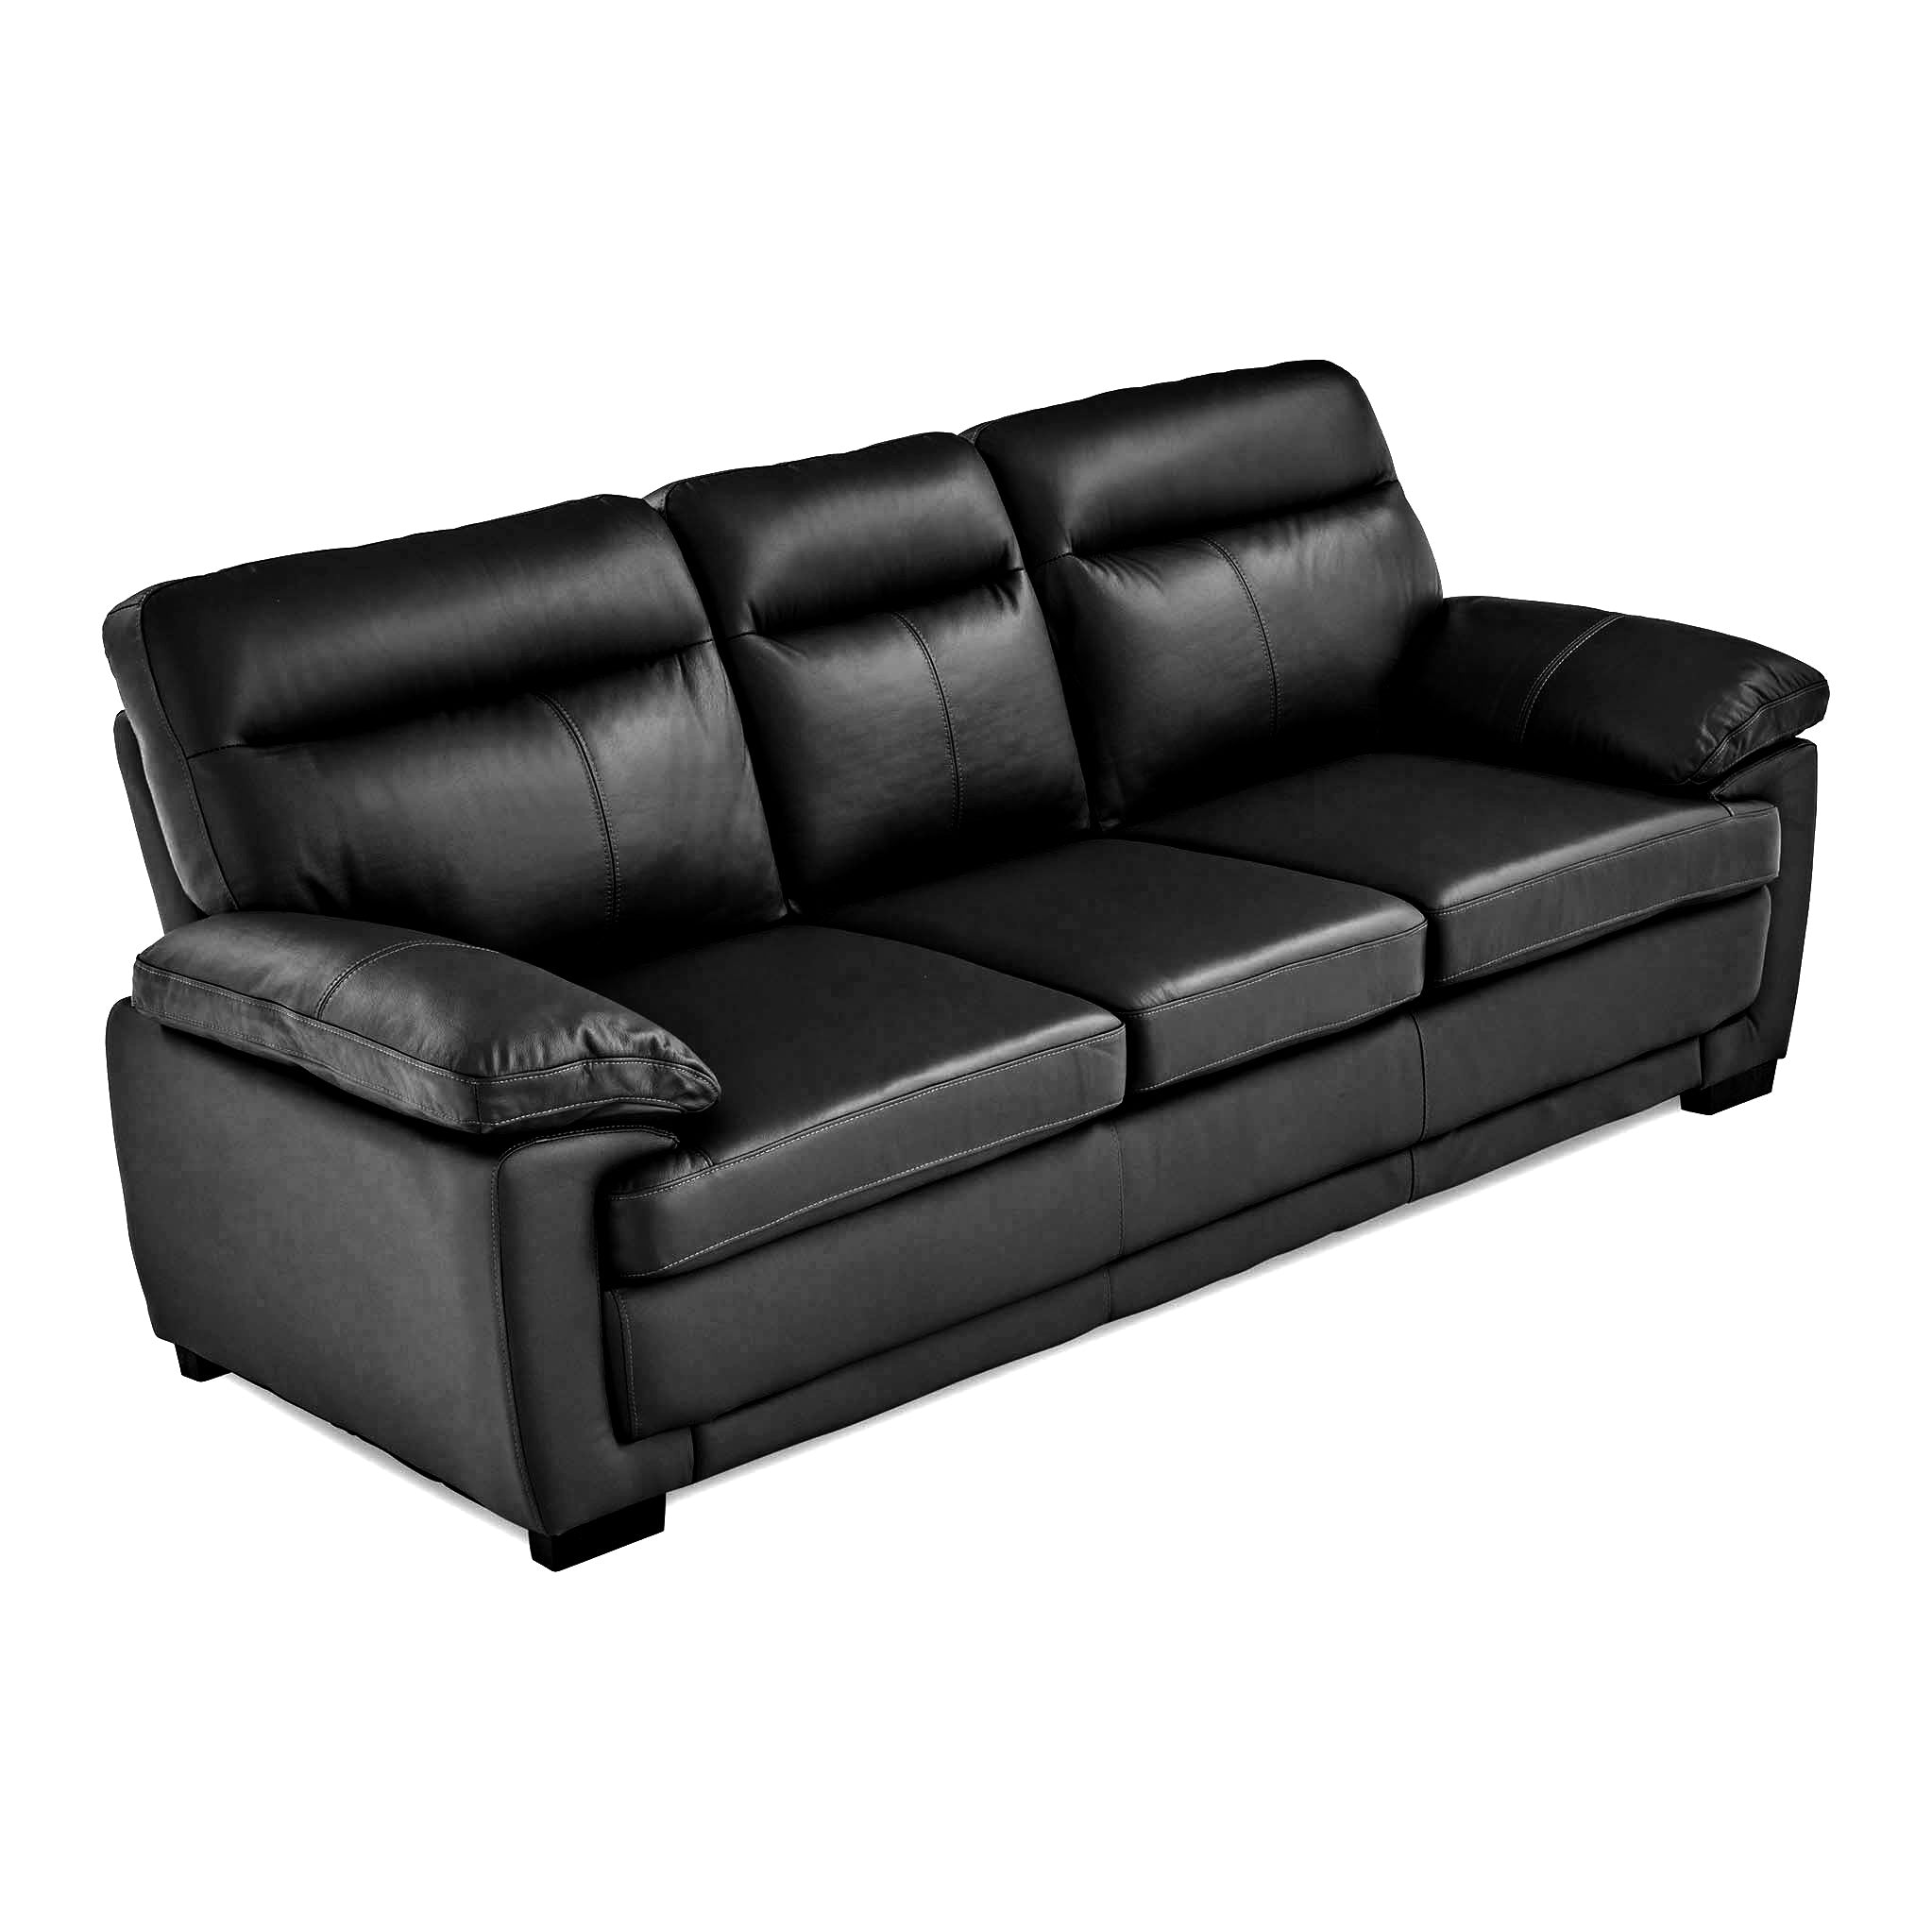 Hugo 3 Seater Leather Sofa Black Grey Large Comfy Modern Upholstered Lawson Settee Couch For Living Room